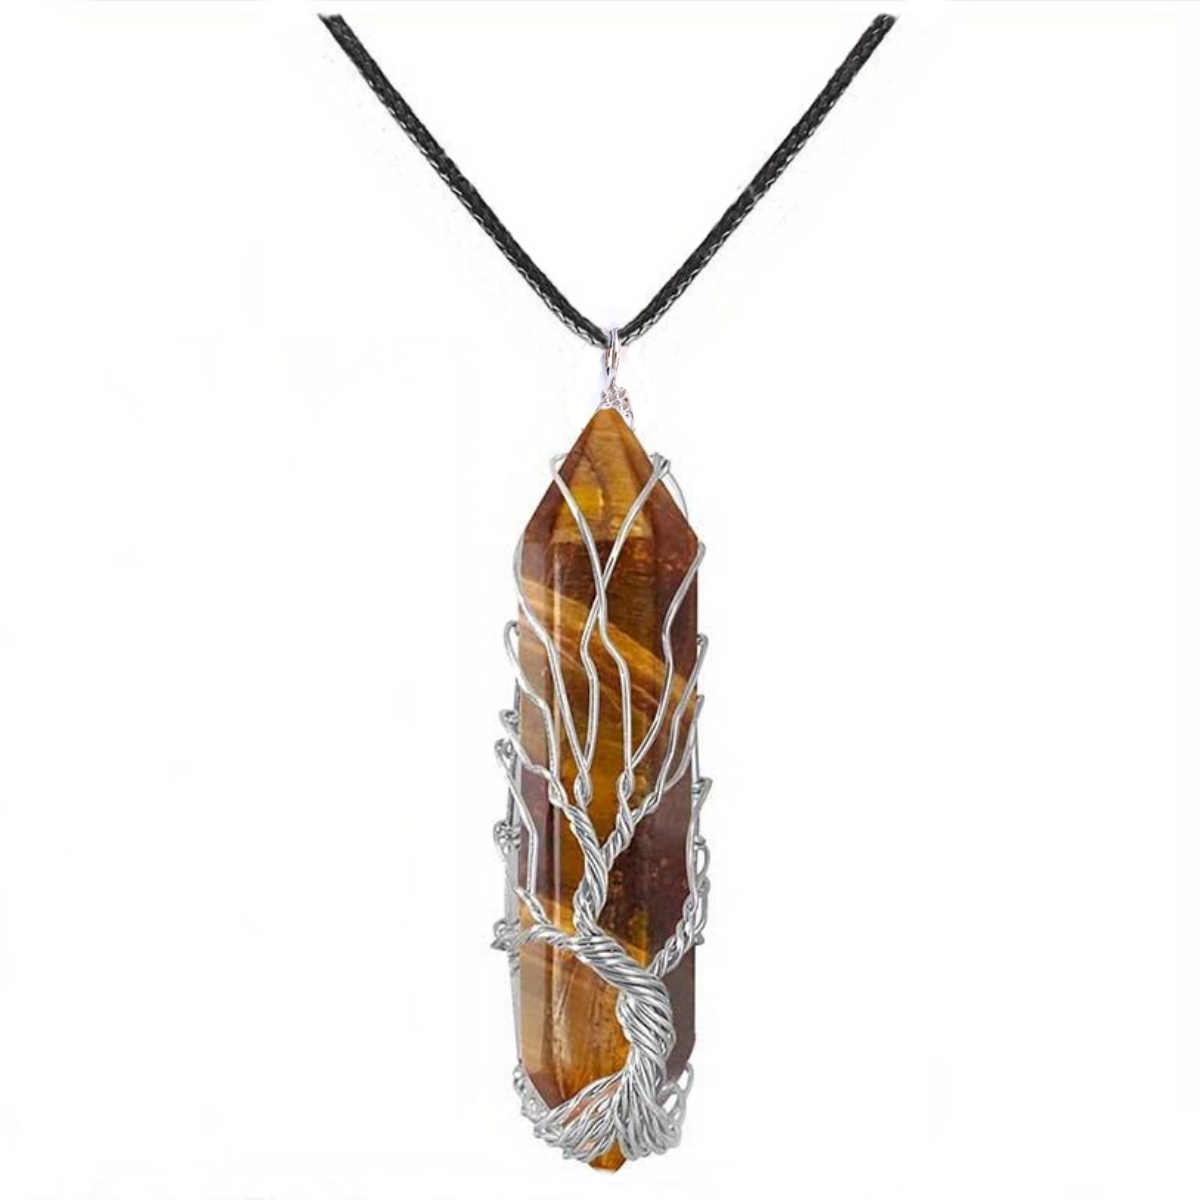 1pc healing crystal necklace tree of life wire wrapped natural stone point pendant necklace hexagonal reiki spiritual quartz gemstone jewelry for women men tiger eye 11